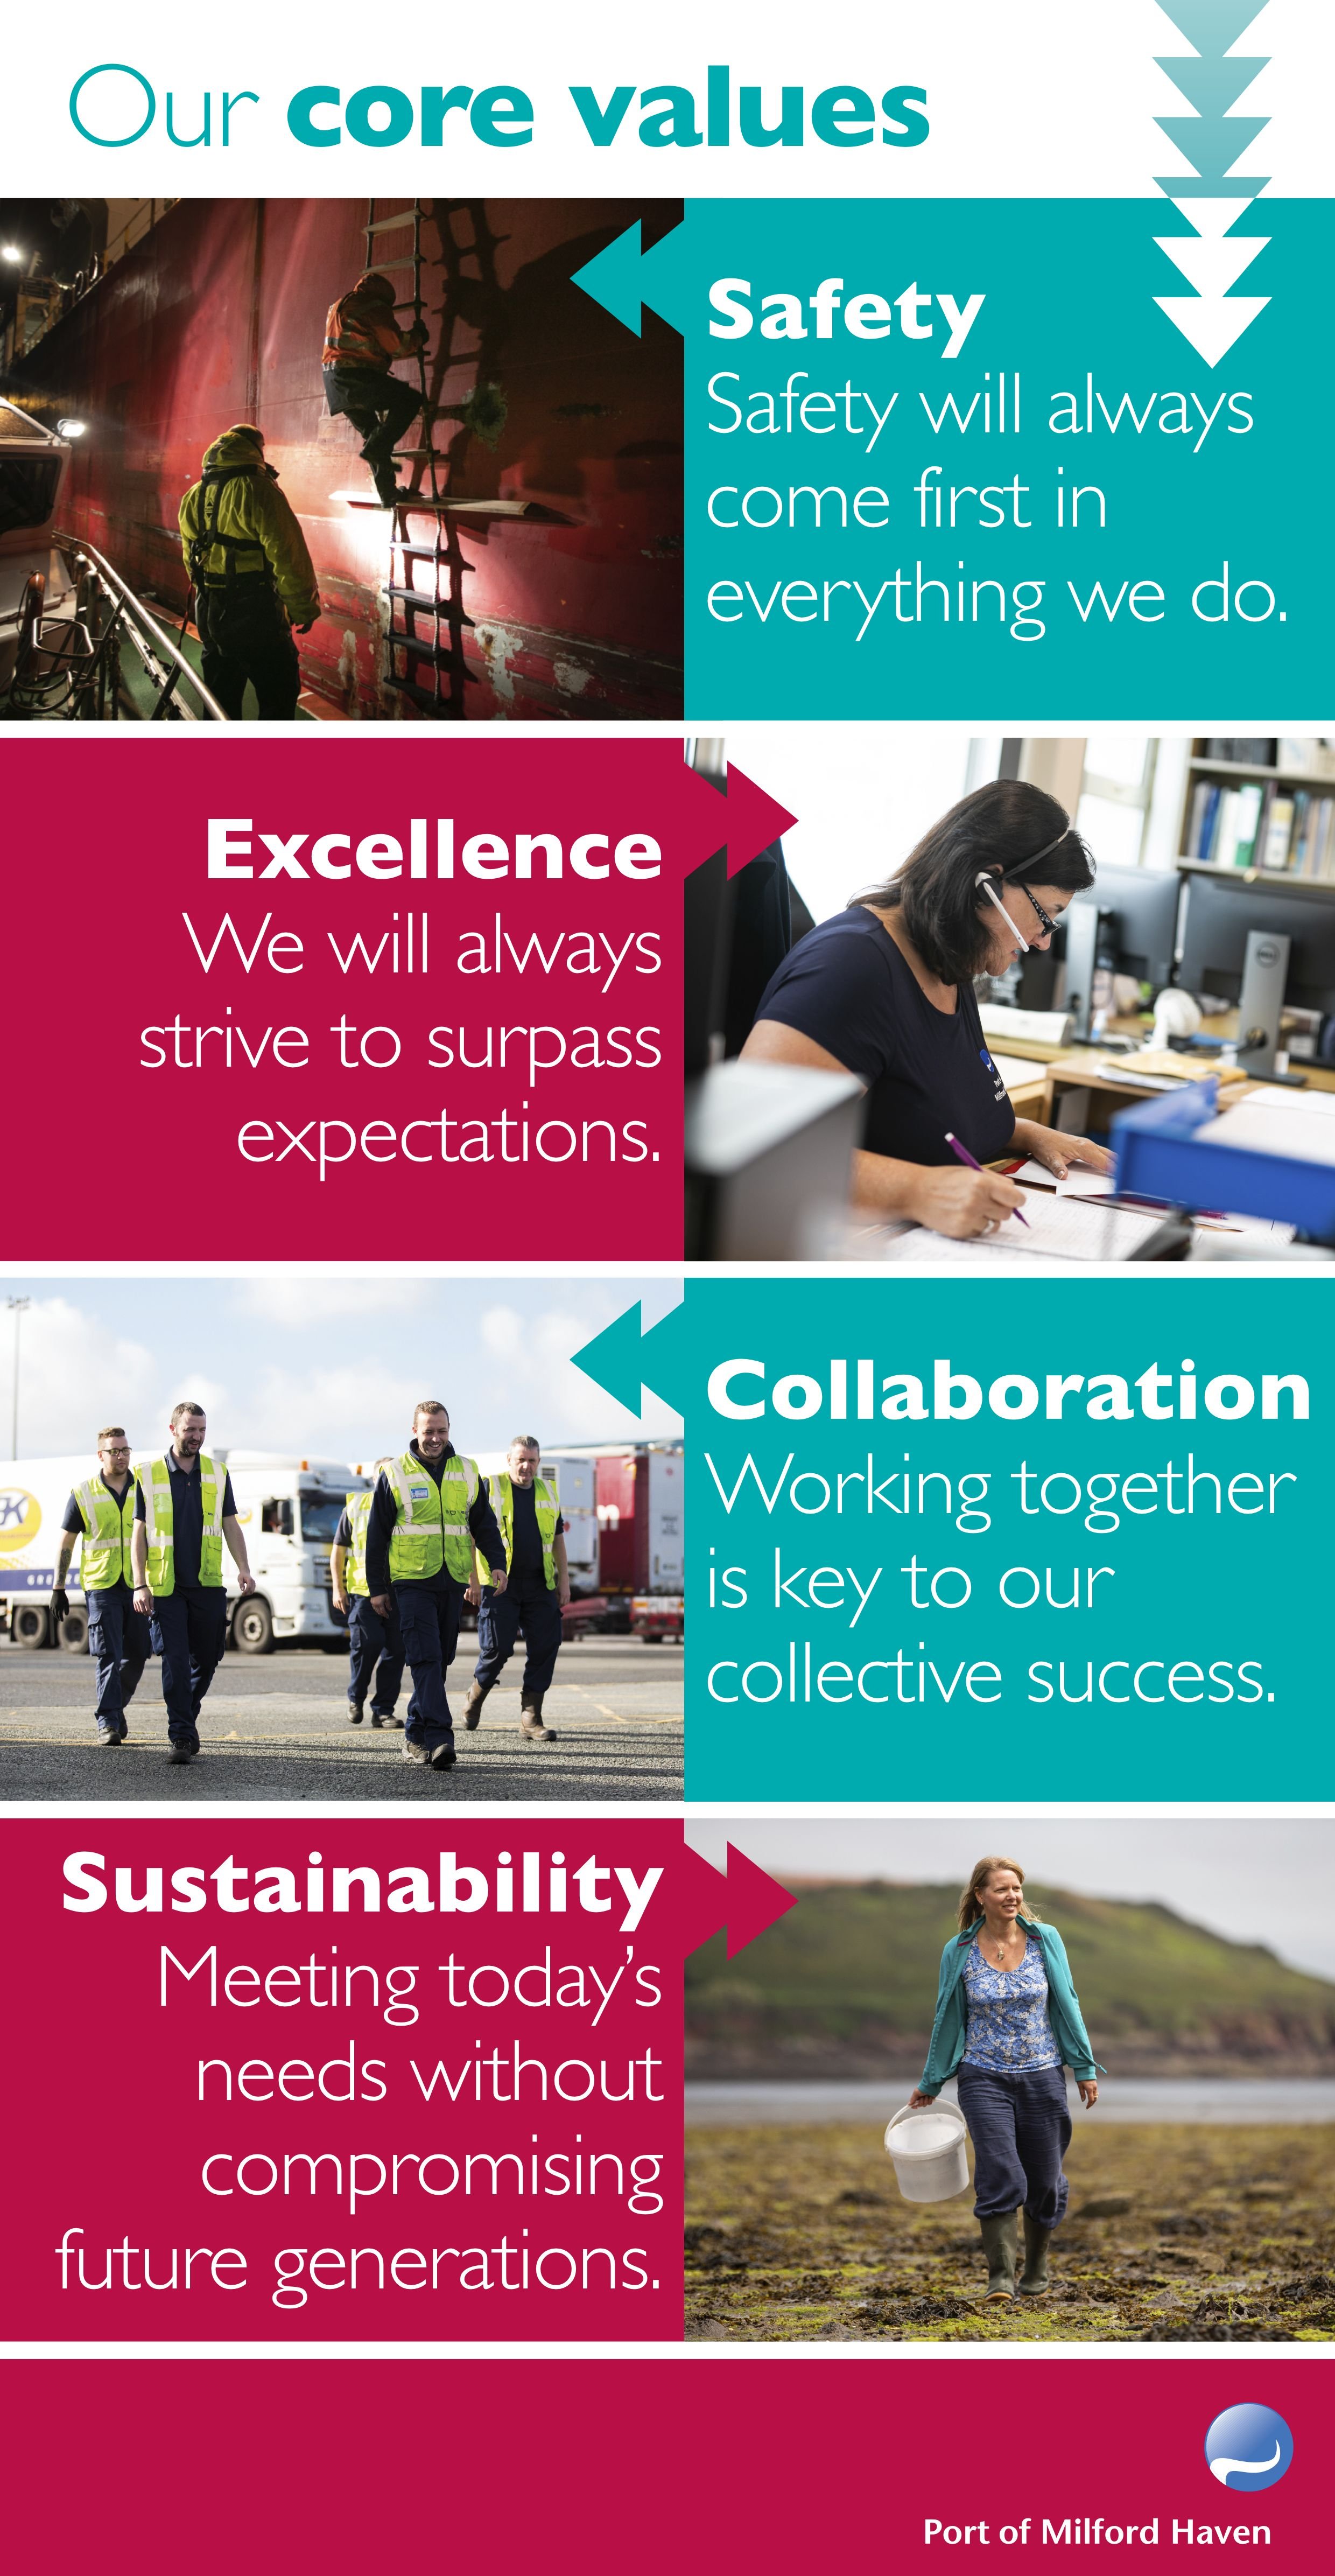 Port of Milford Haven core values